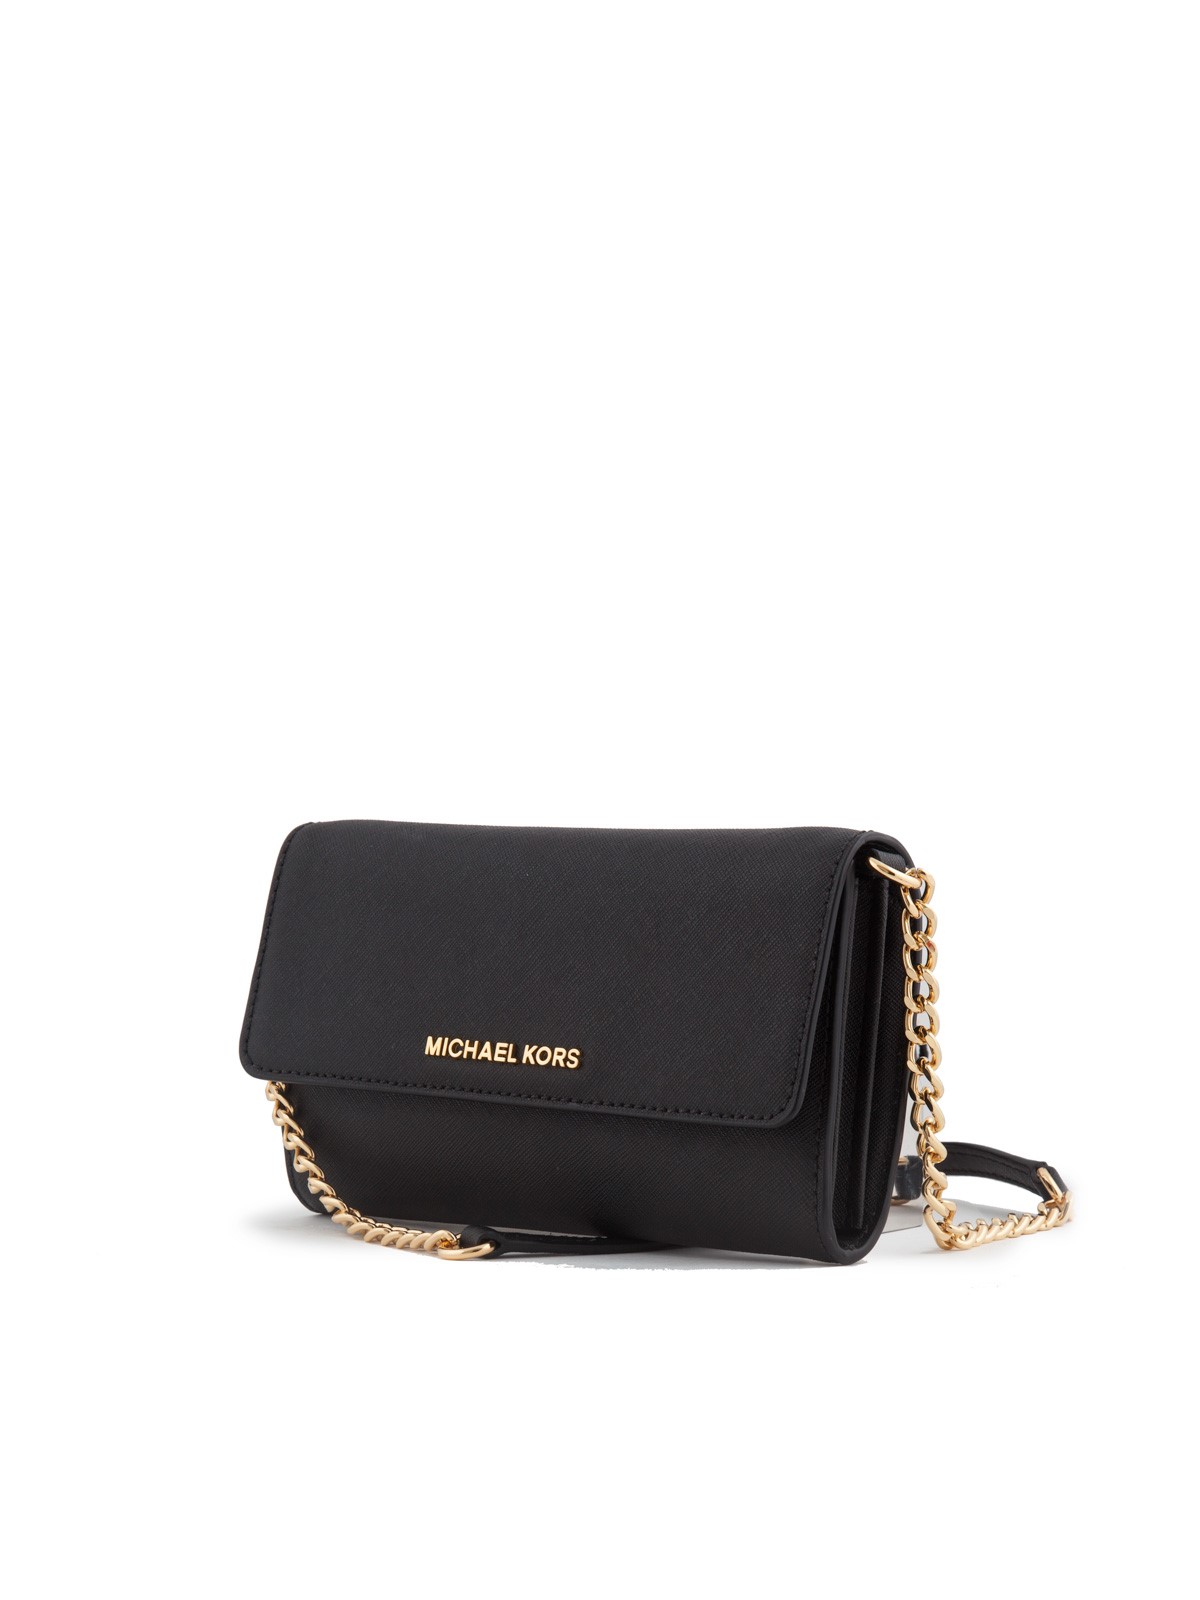 michael kors mk WRIST WALLET WITH CHAIN 